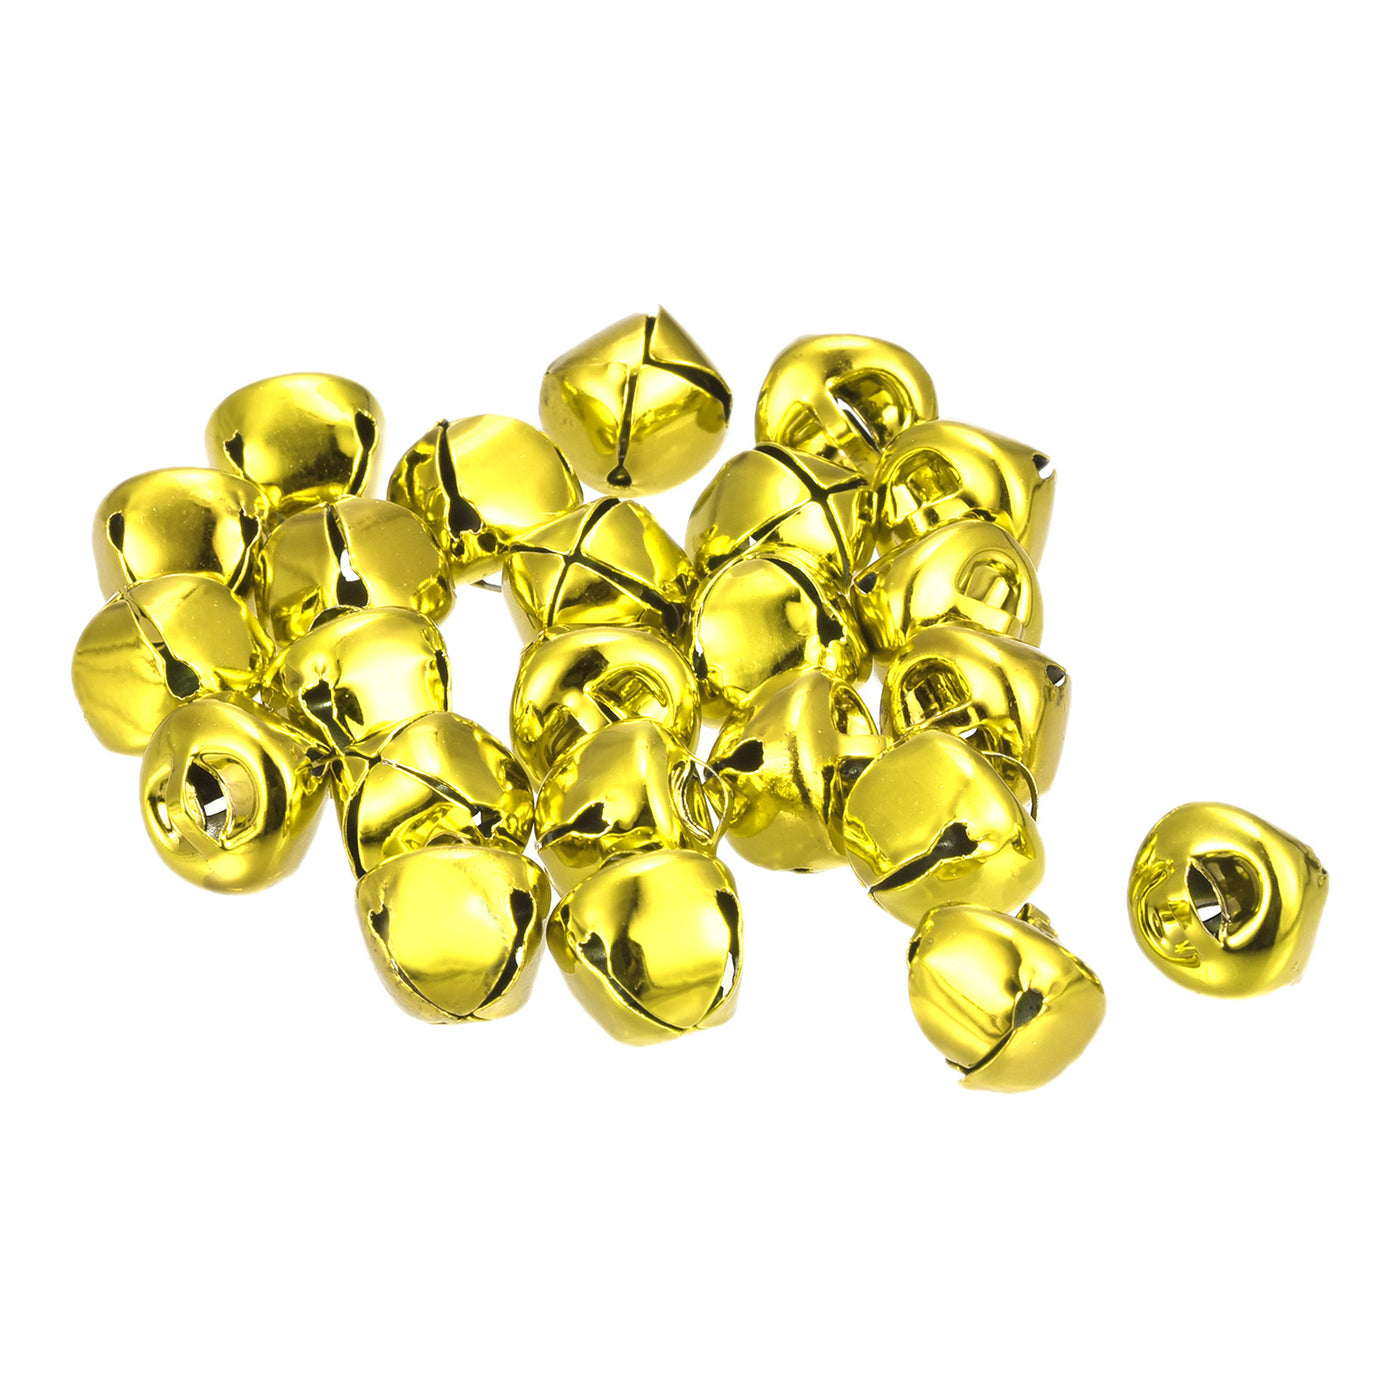 uxcell Uxcell Jingle Bells, 12mm 120pcs Small Bells for Crafts DIY Christmas, Gold Tone